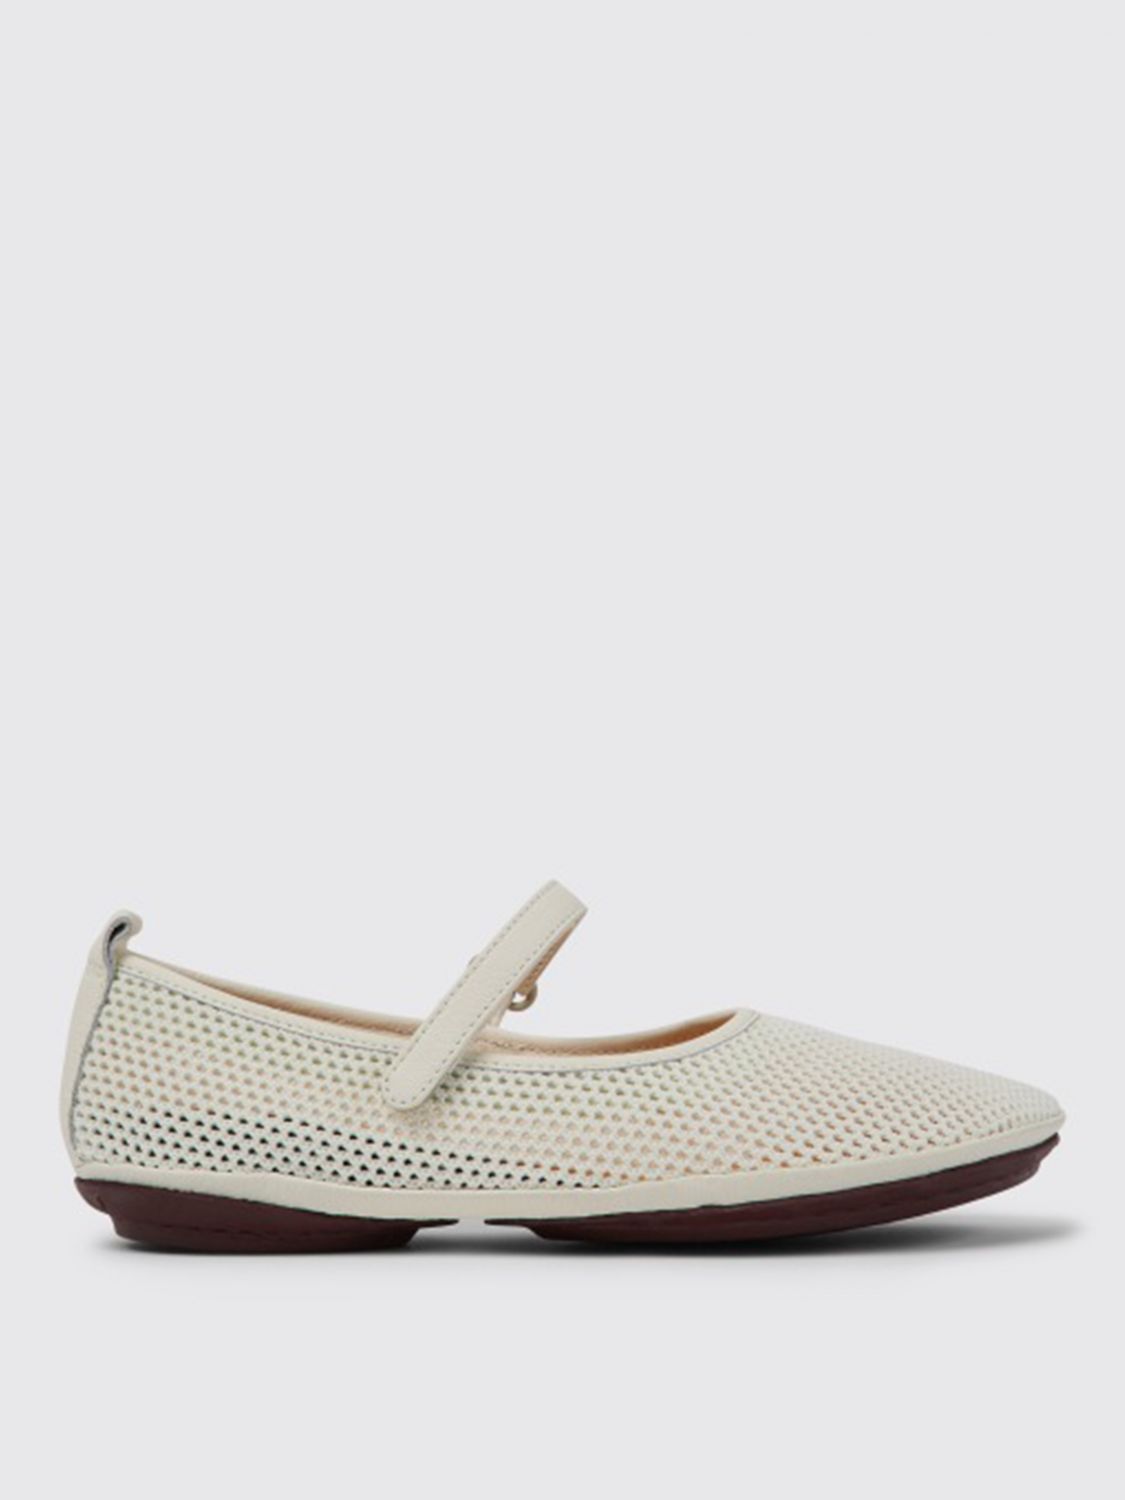 Camper Right Camper ballerinas in perforated fabric